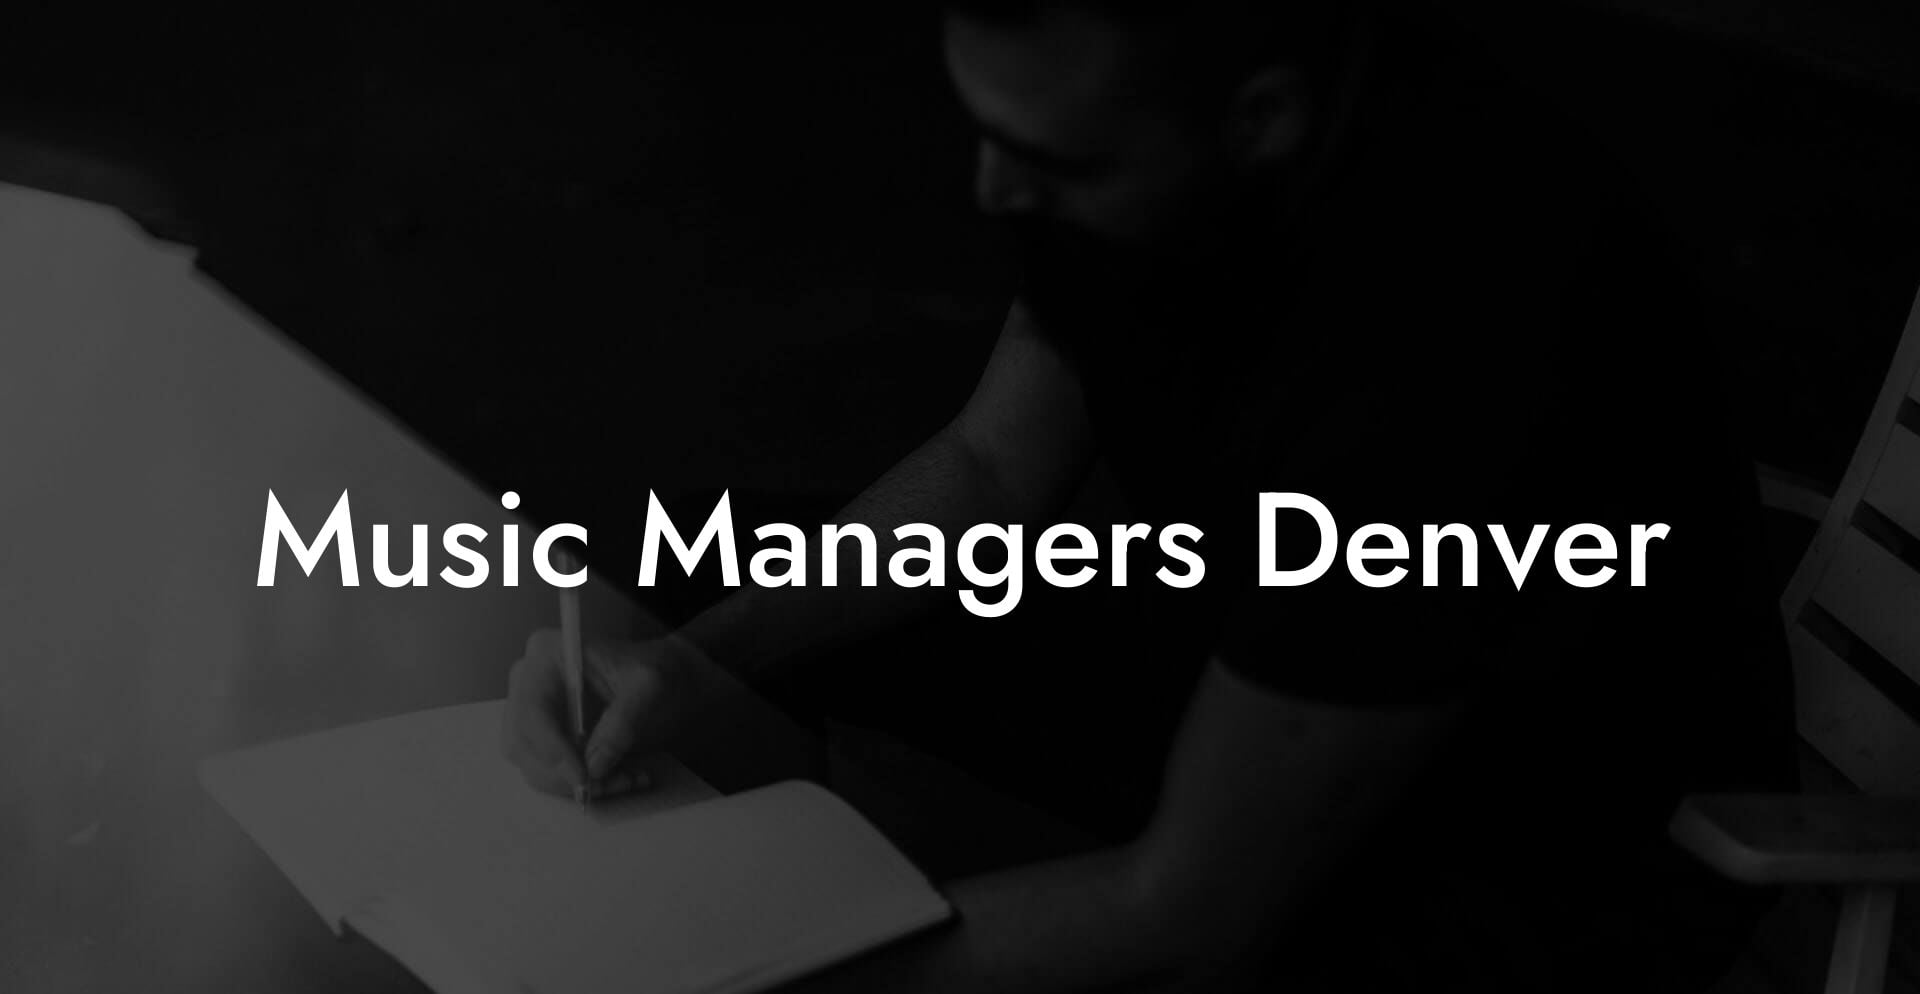 Music Managers Denver